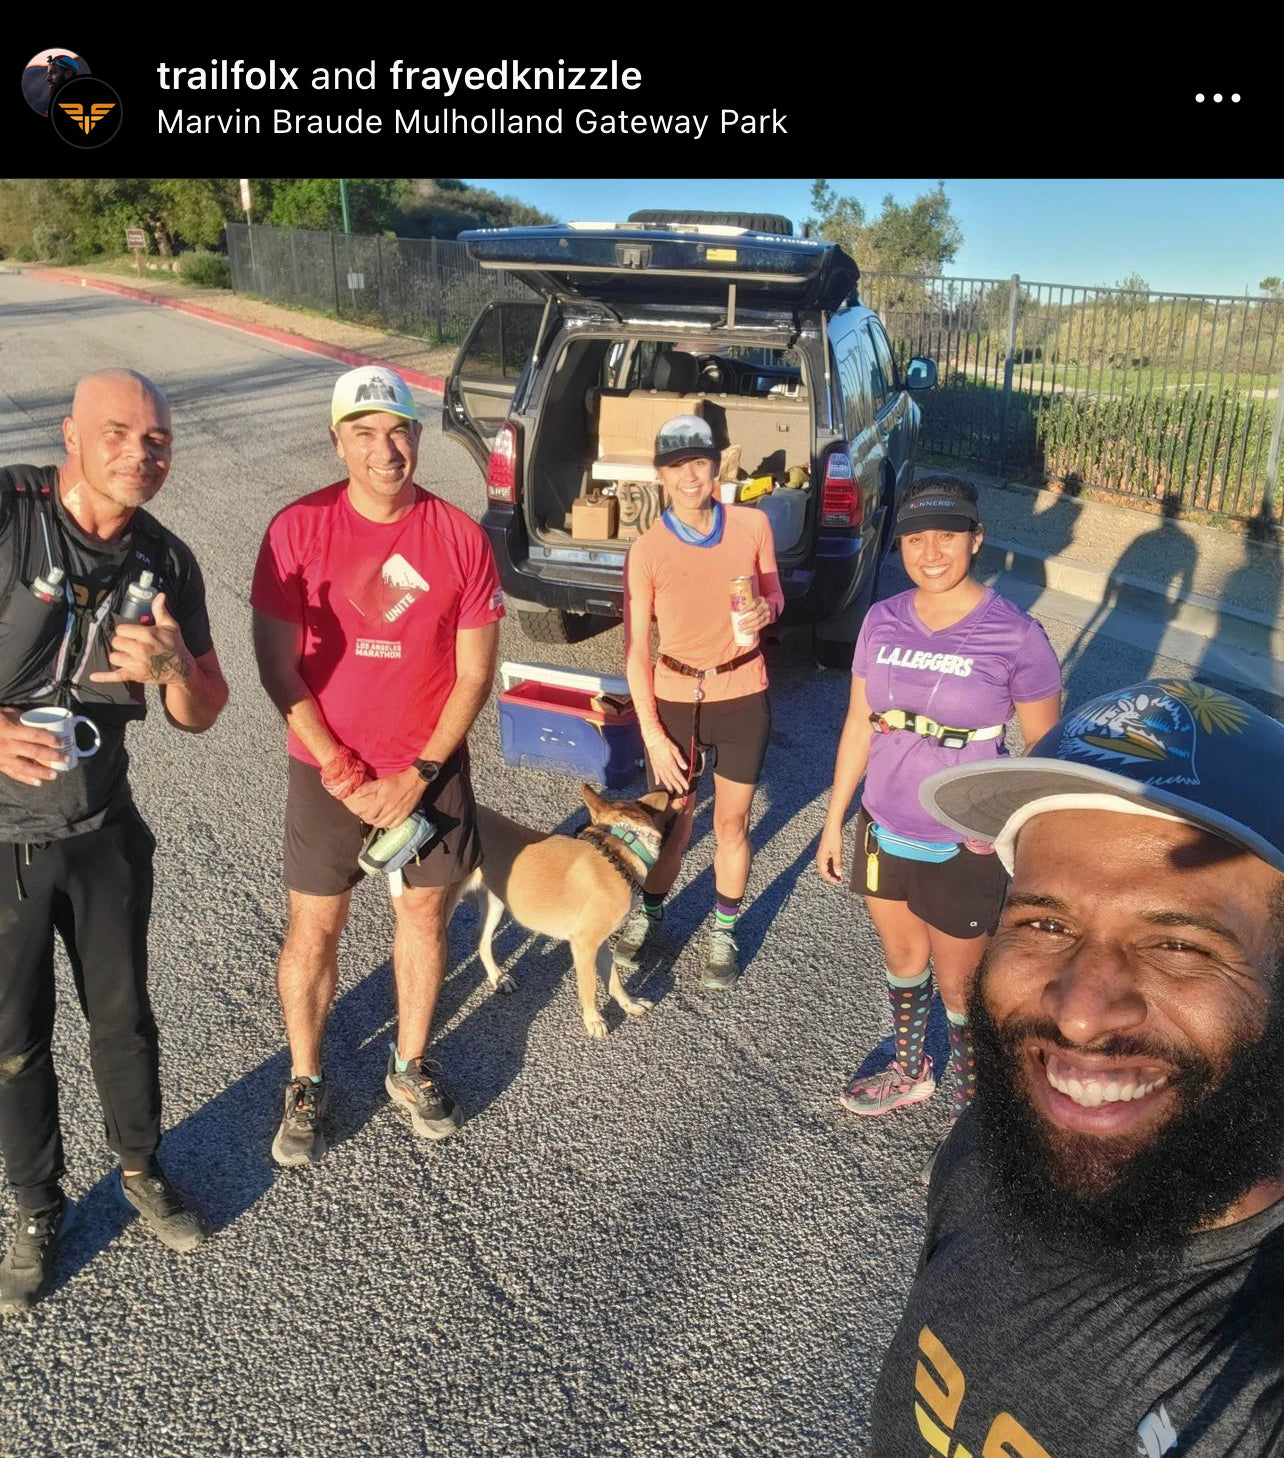 Instagram post from Trail Folx showing a selfie group shot of a running group